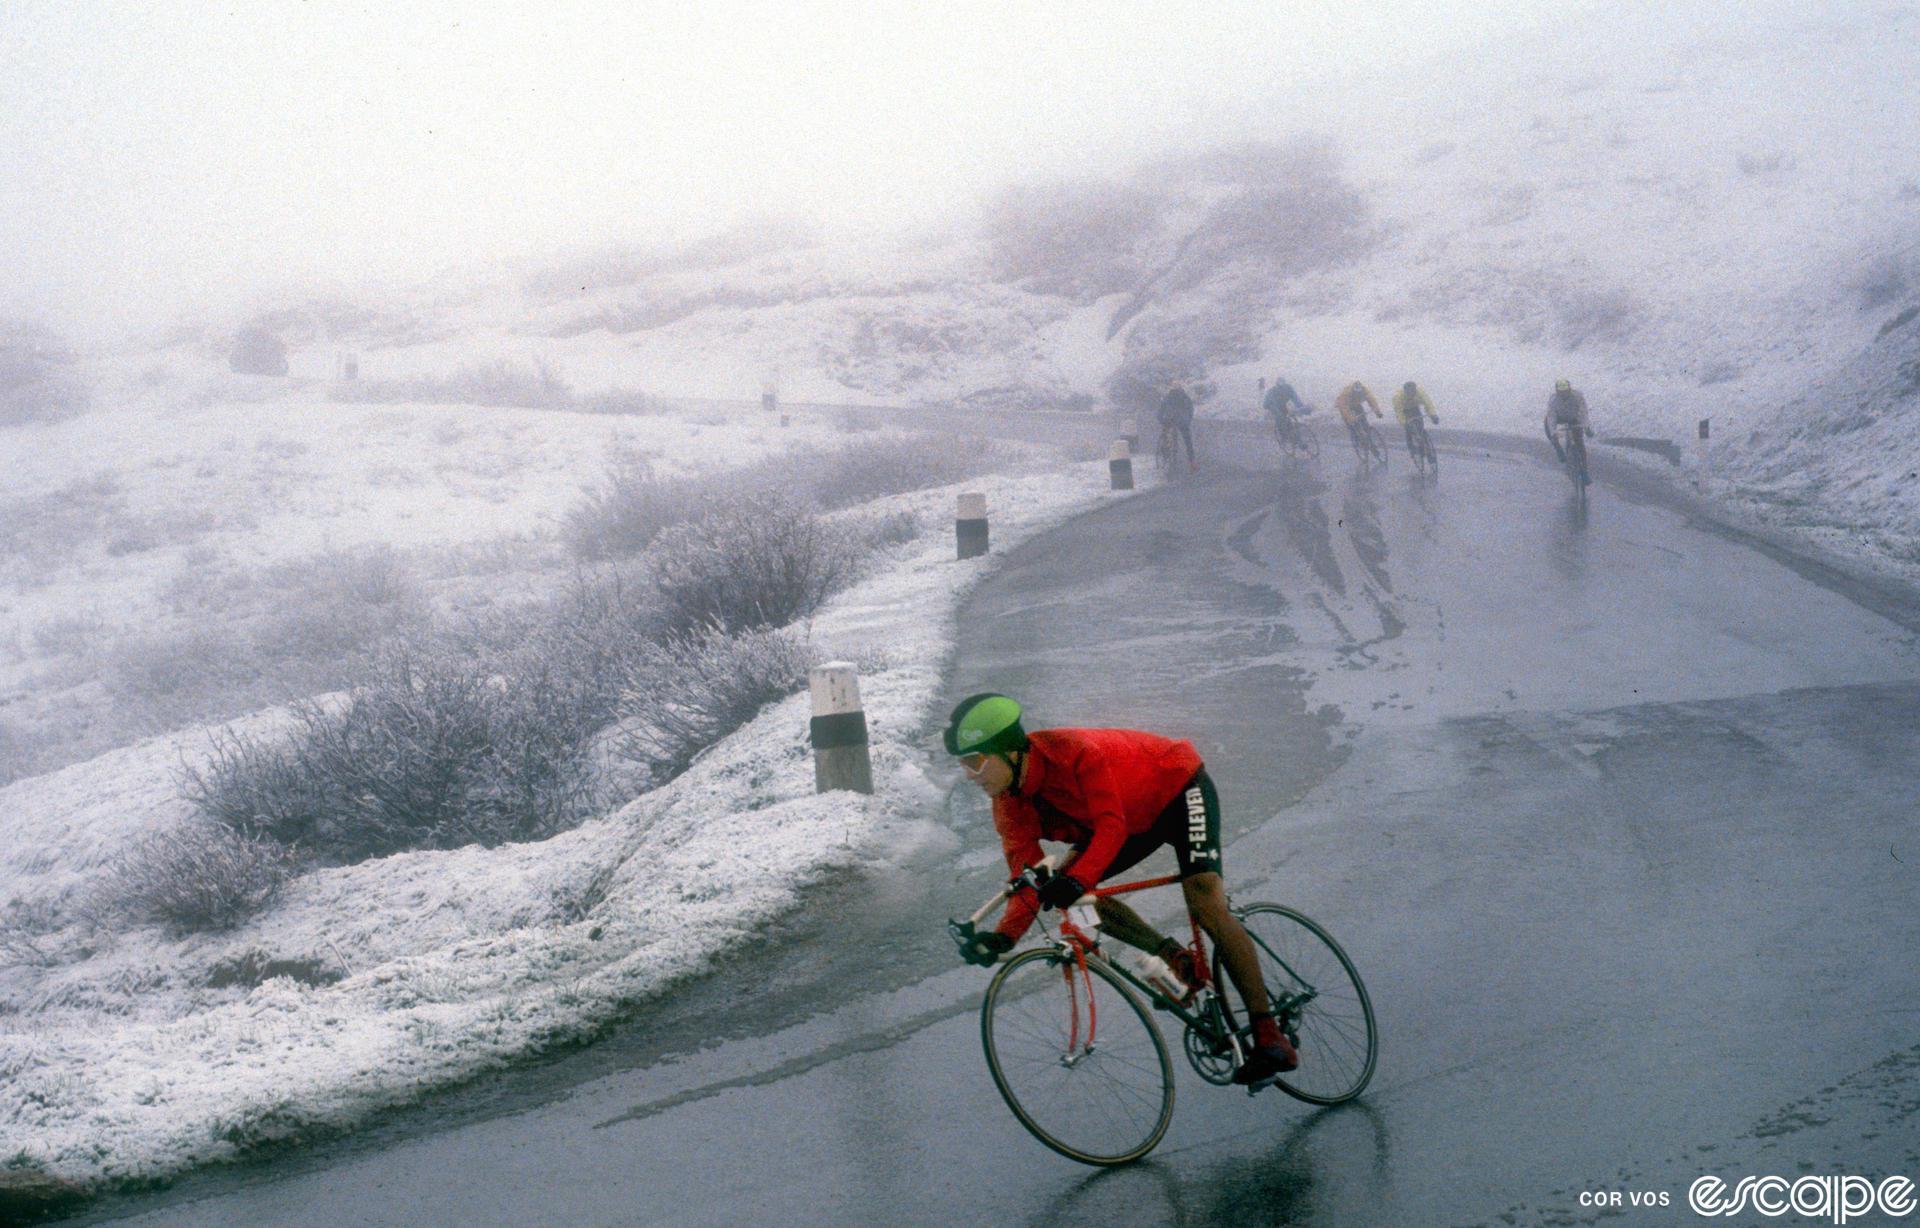 Andy Hampsten descends a fog-shrouded, snowy Passo di Gavia in the 1988 Giro d'Italia. He's wearing a fire engine-red jacket and full neoprene gloves as well as a helmet cover and skullcap, but his legs are bare. Behind, other riders descend on wet, freezing roads.